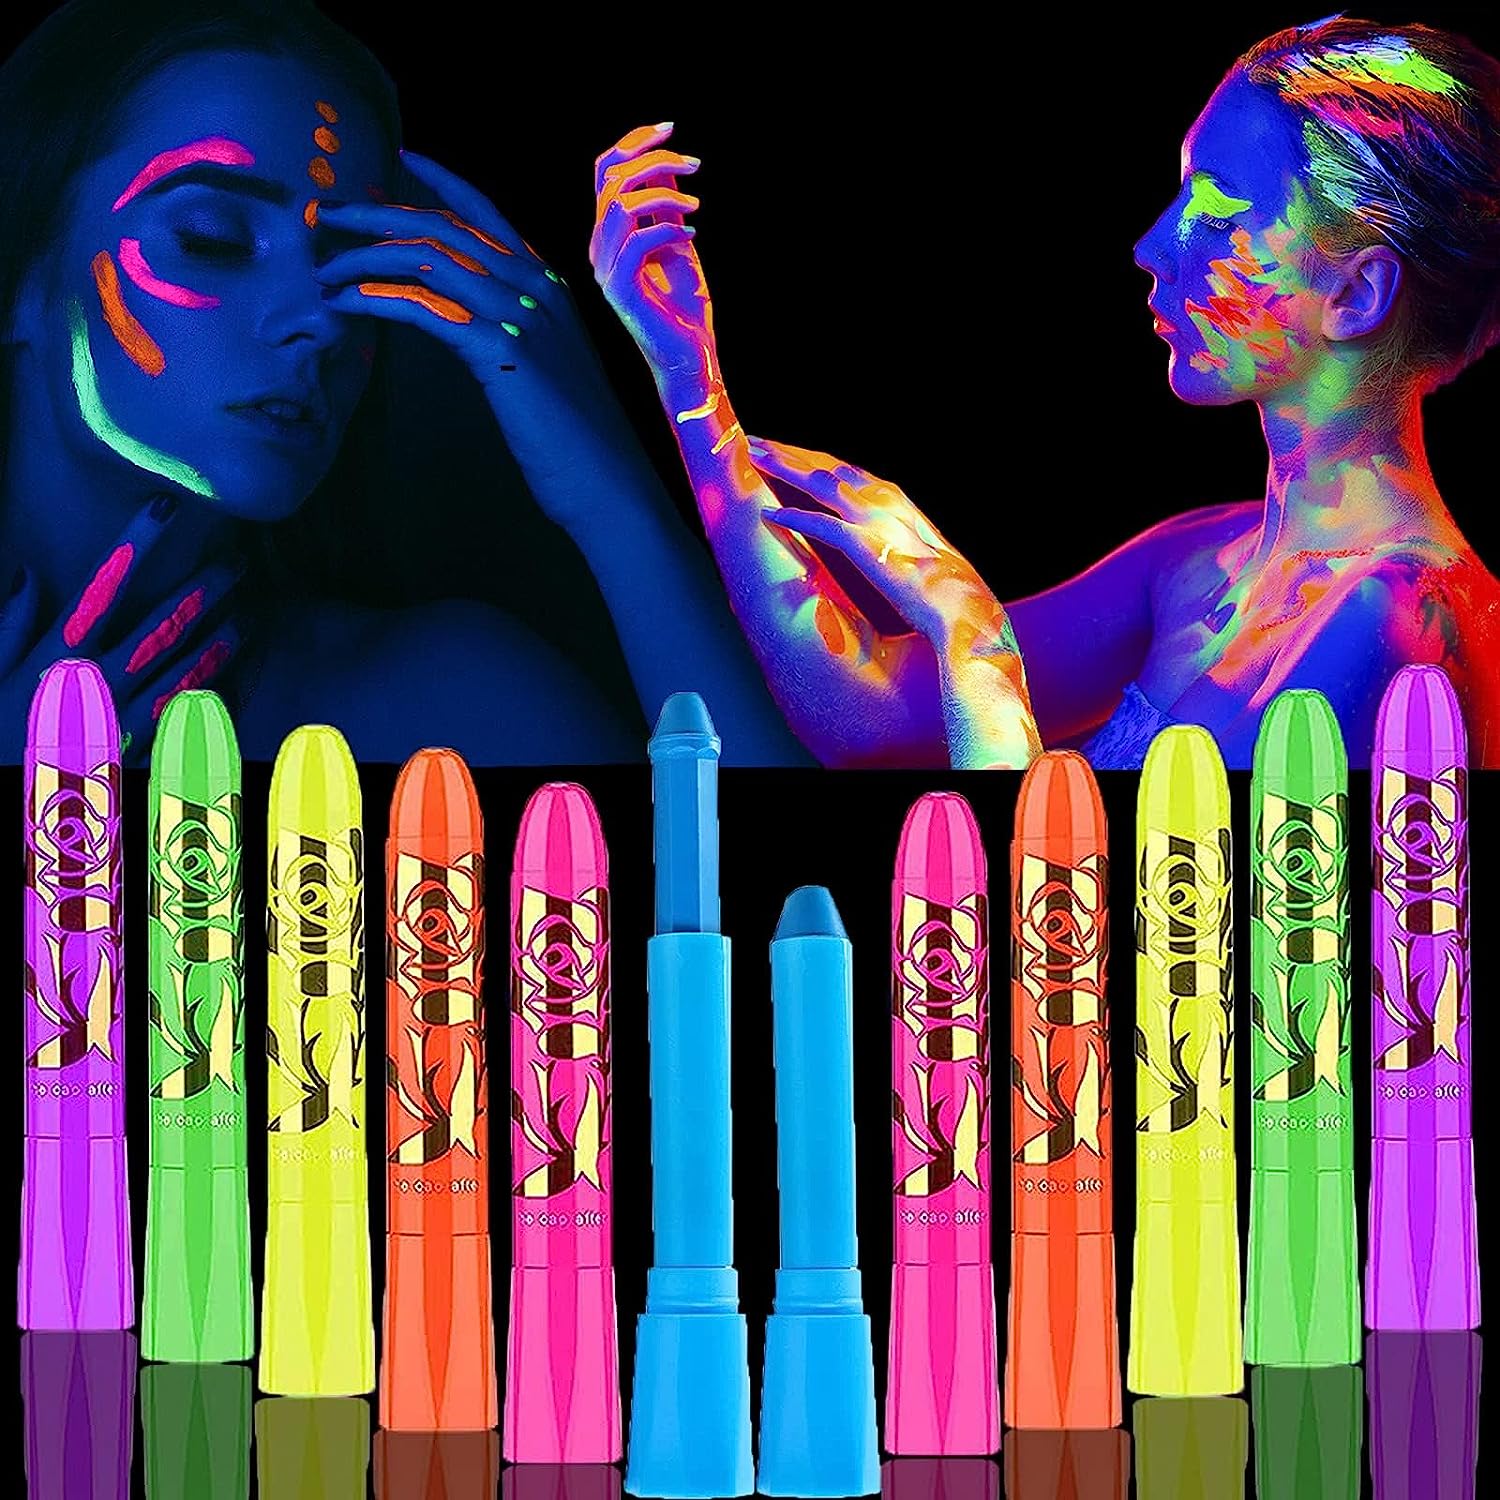 Glow Pop In Dark Face And Neon Face & Body Paint Crayon Kit And Makeup  Markers